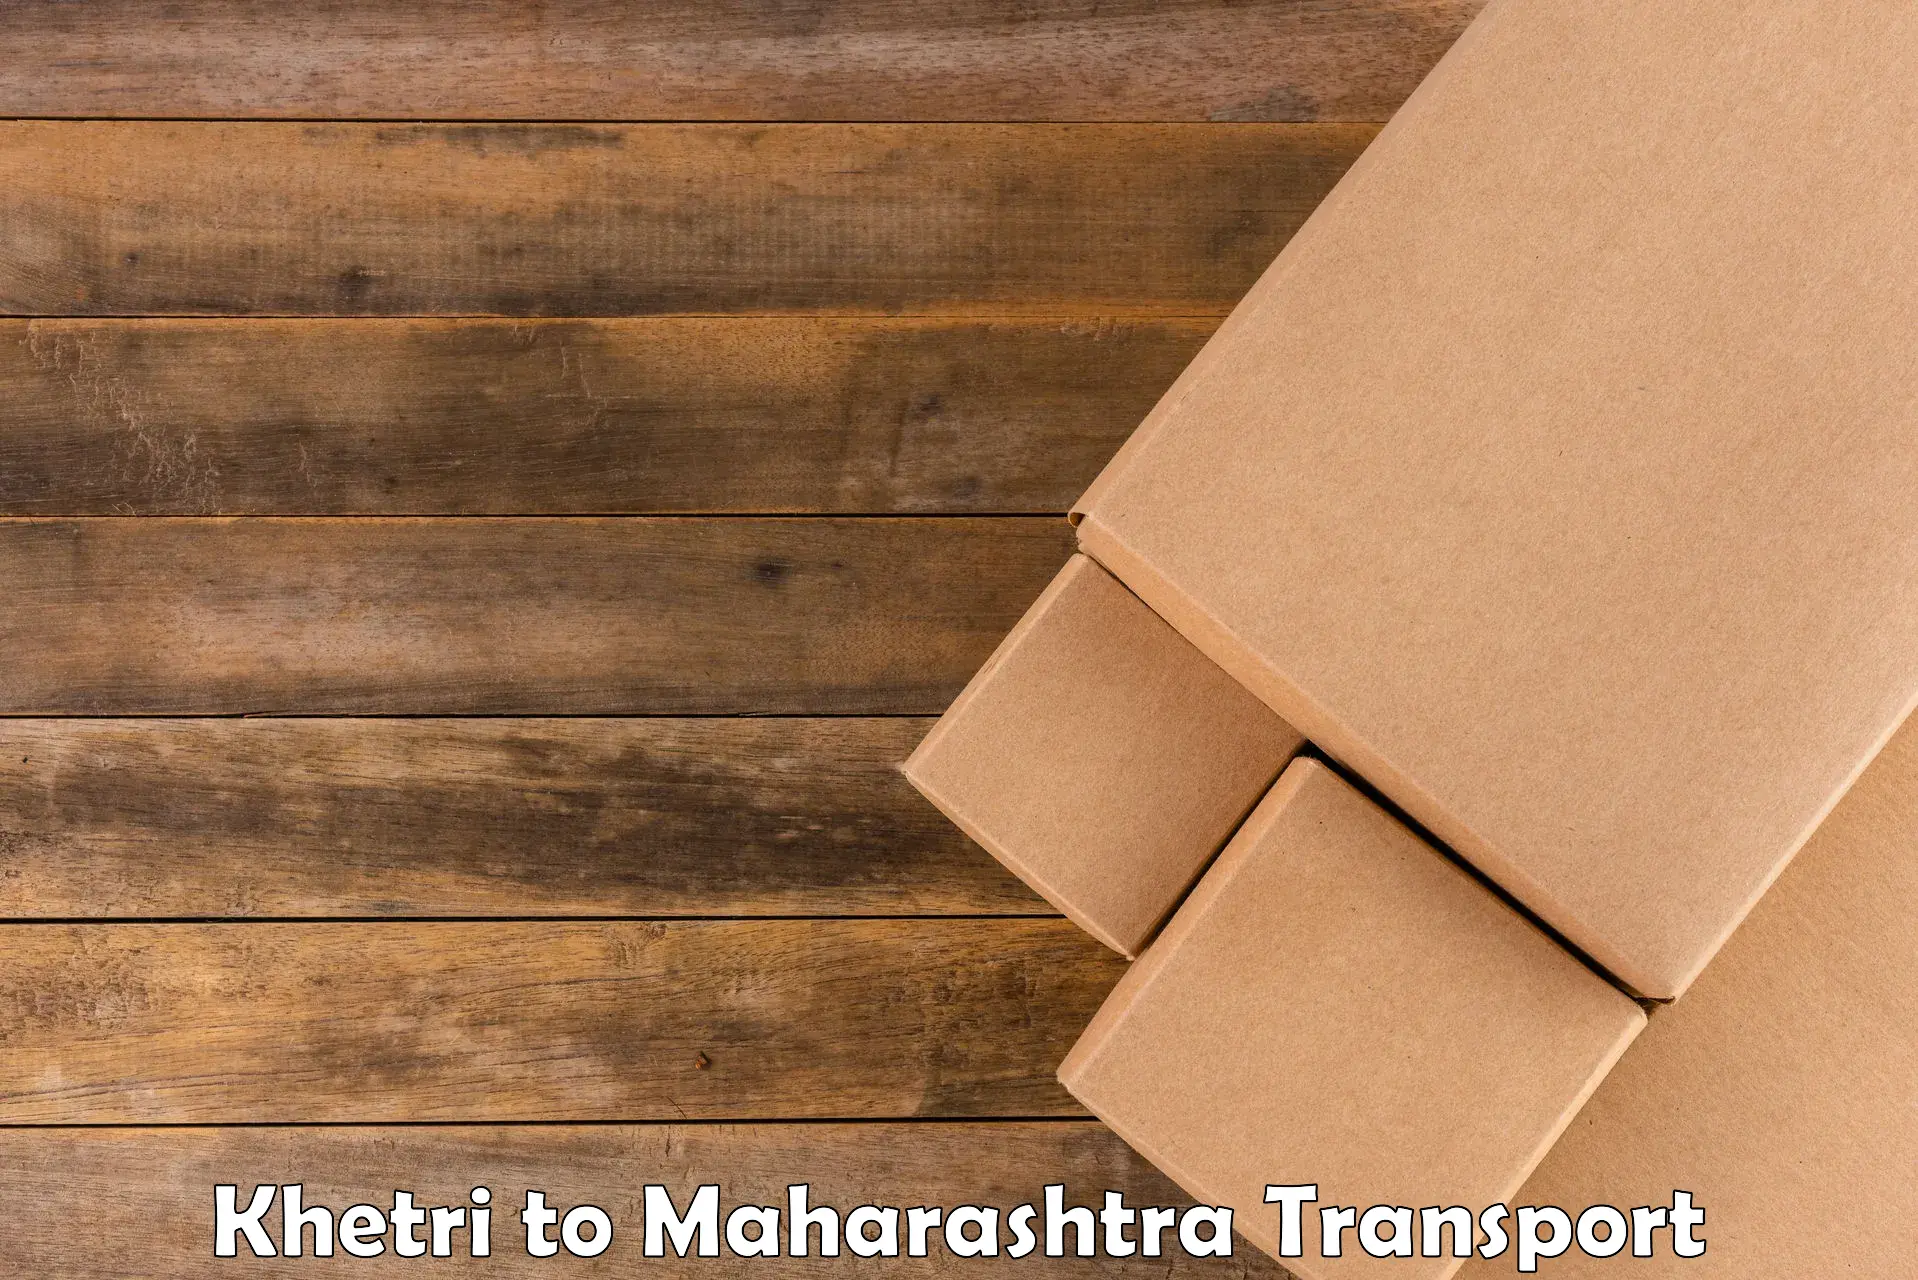 Transport bike from one state to another Khetri to Pimpri Chinchwad